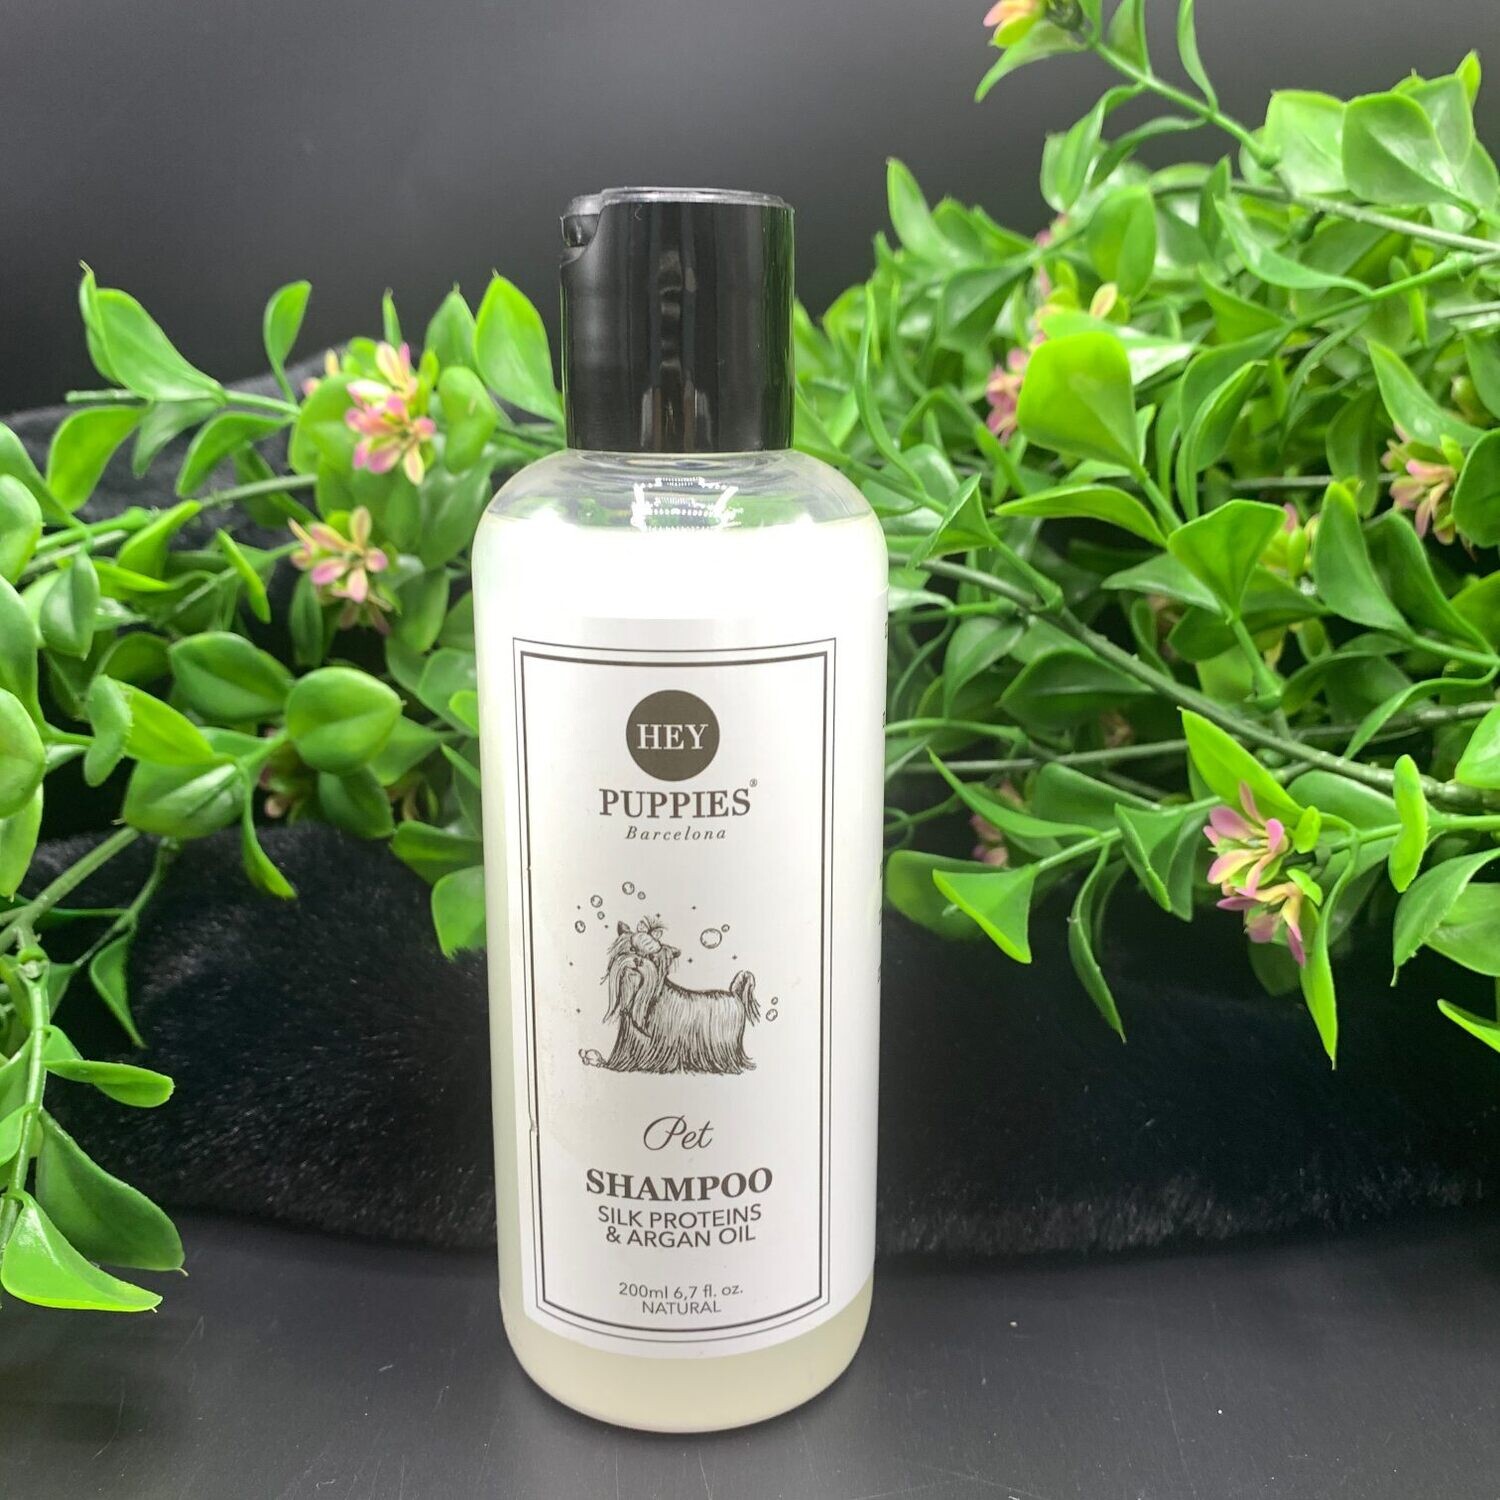 Natural shampoo with silk proteins and argan oil for dog - Stock